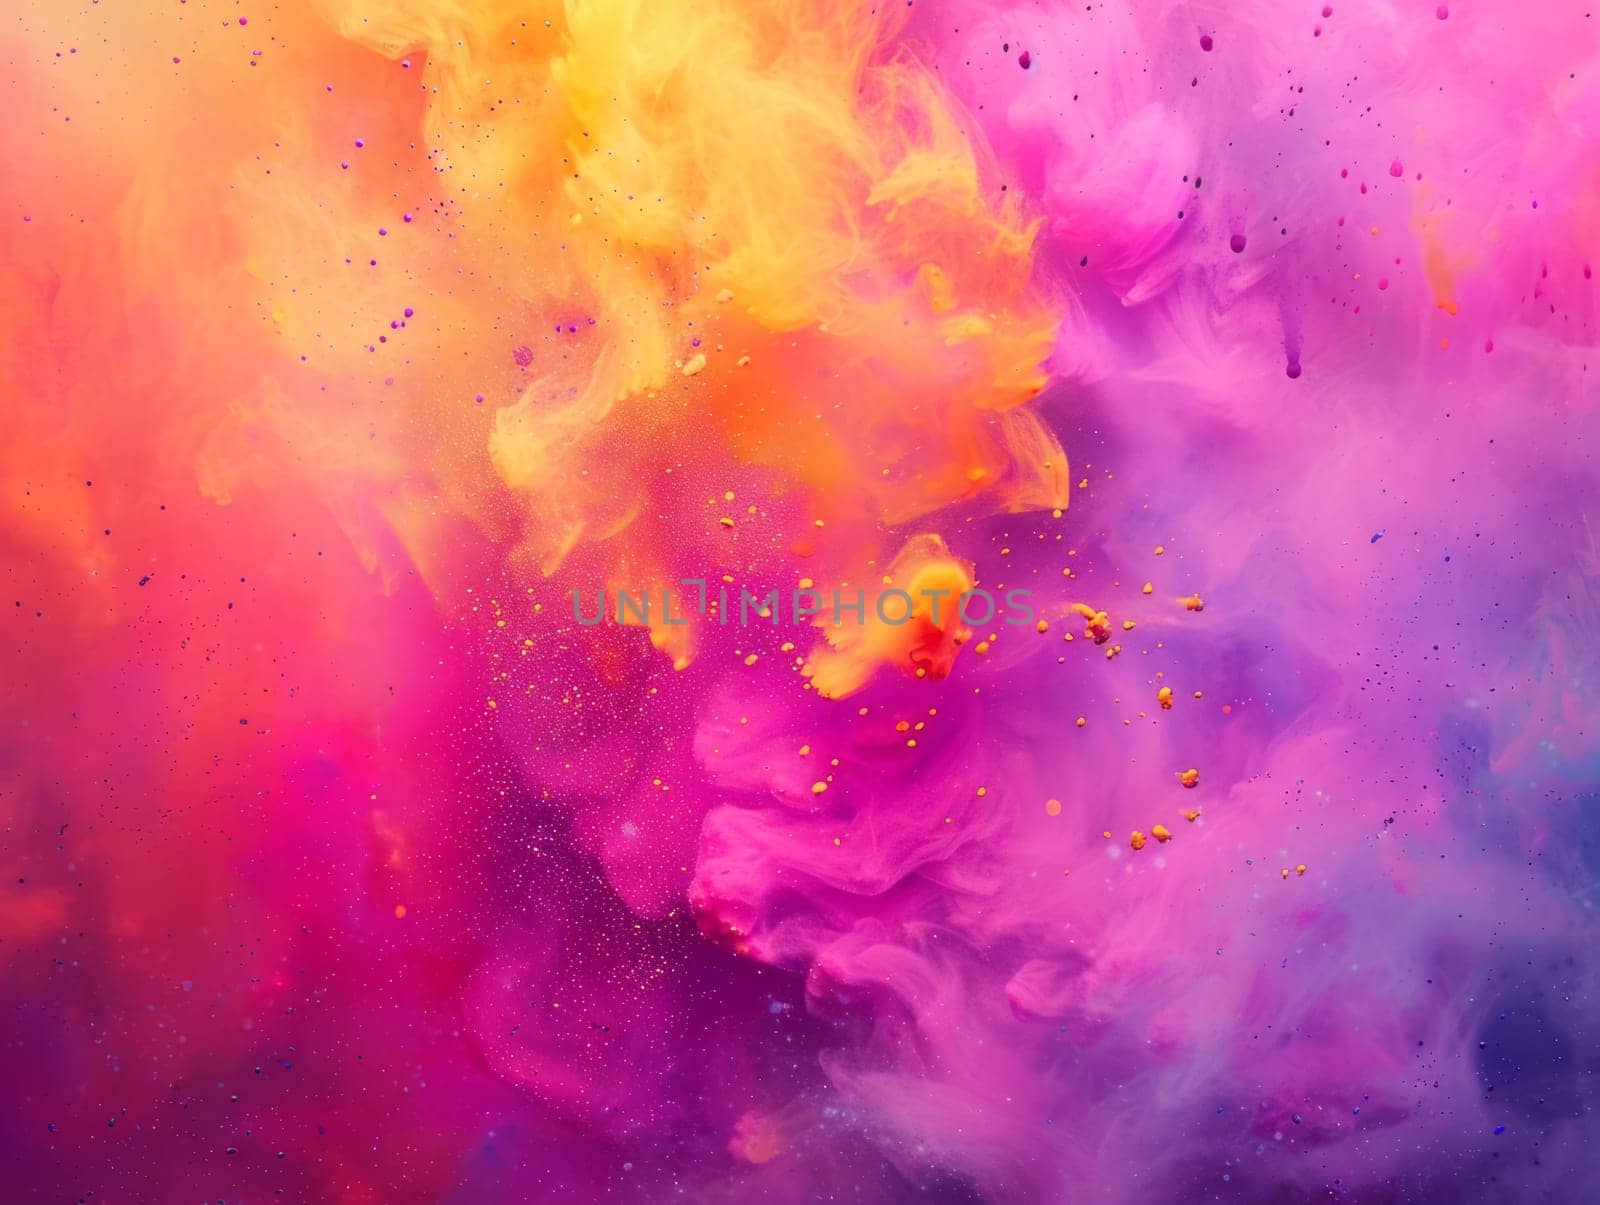 HOli Decorative Dye Splash, color powder explosion. Abstract colorful rainbow background with color splashes. by iliris